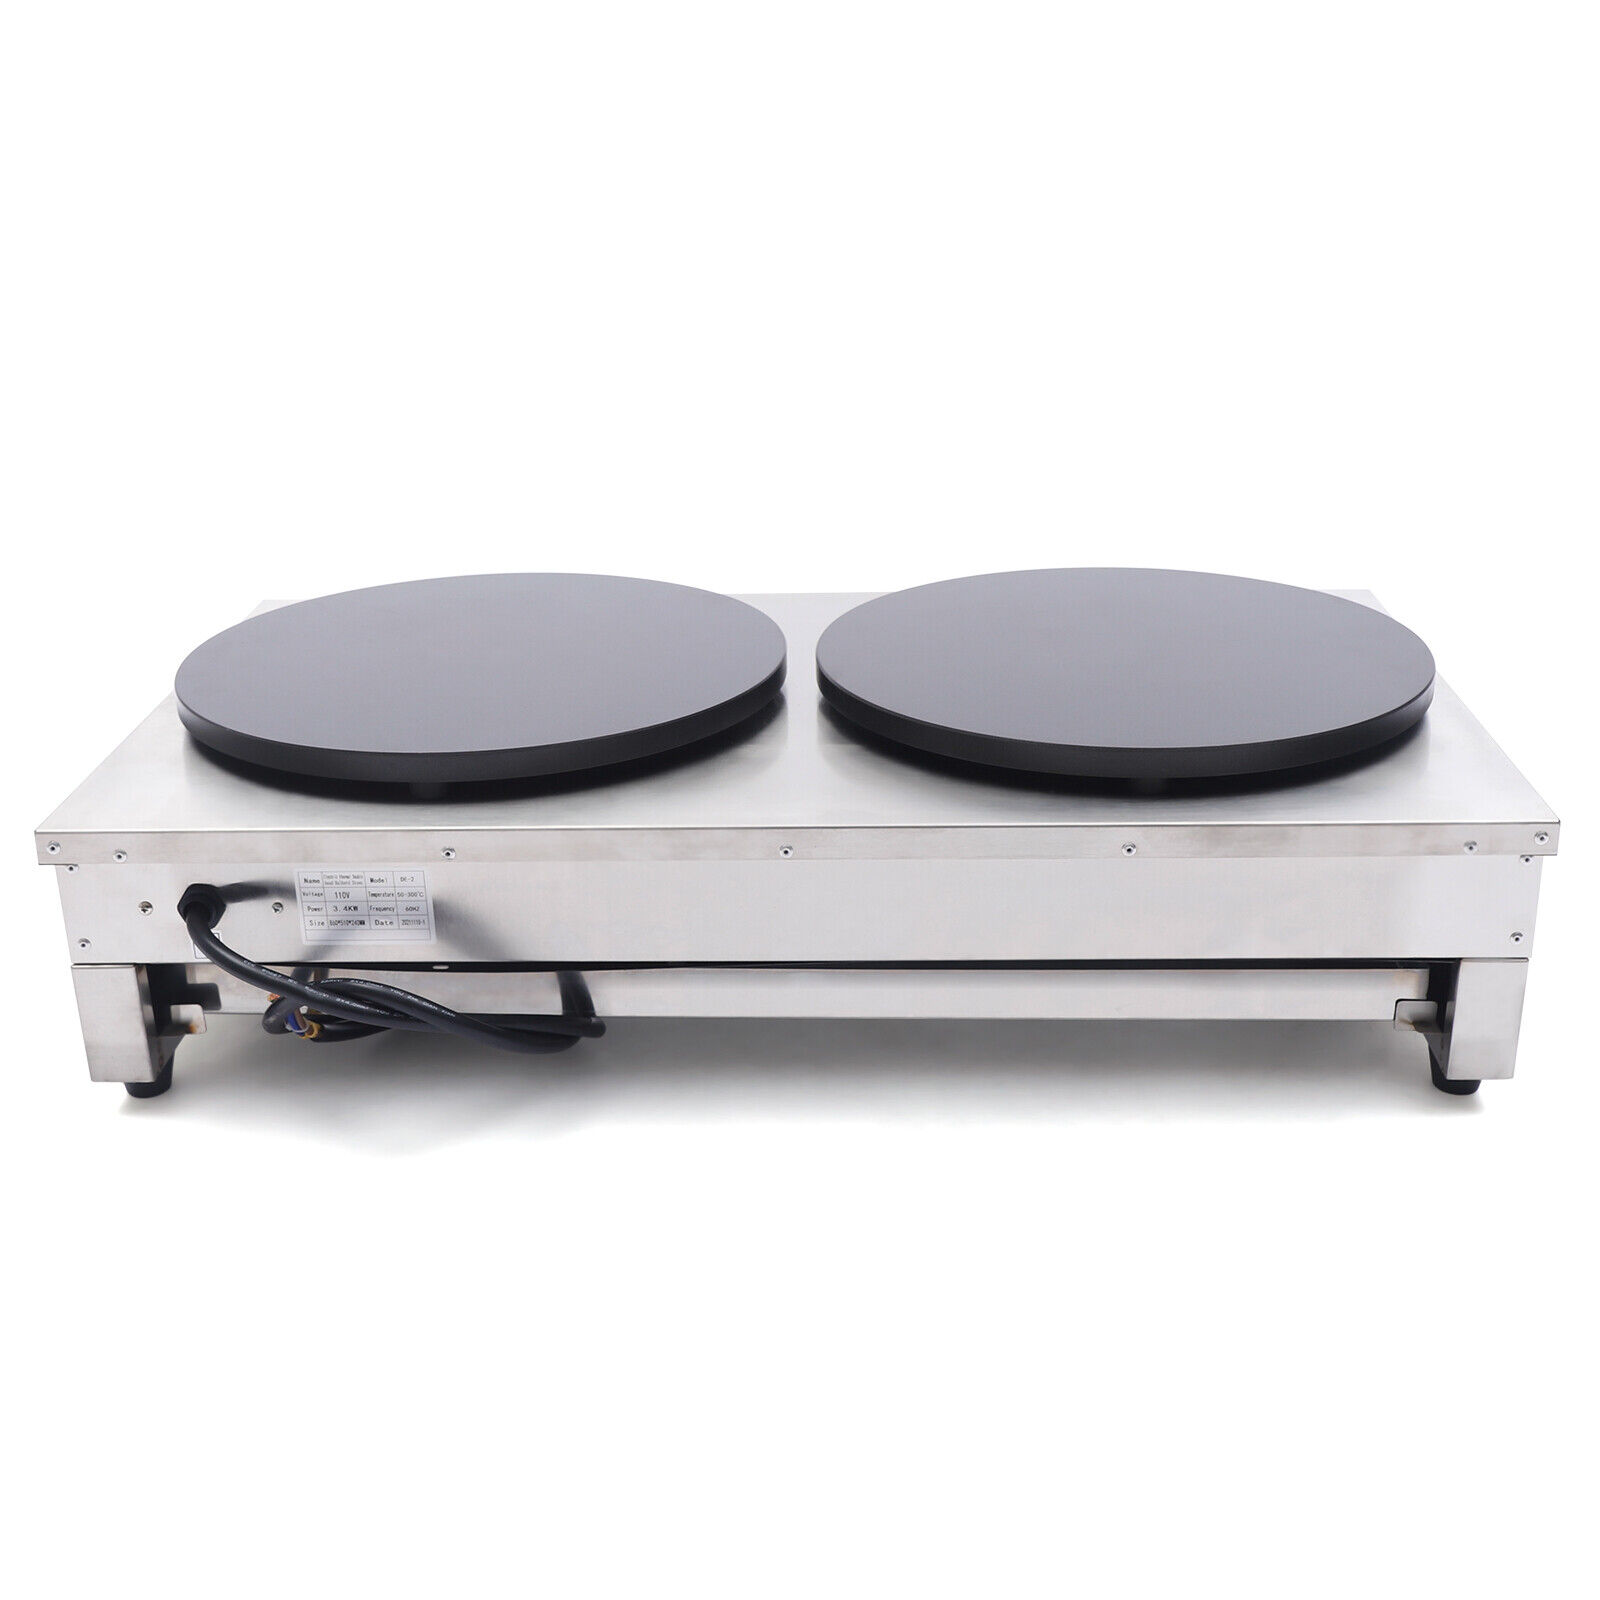 3kw+3kw 40cm 16" Commercial Double Pancake Maker Luxury Electric Crepe Unbranded Does Not Apply - фотография #10